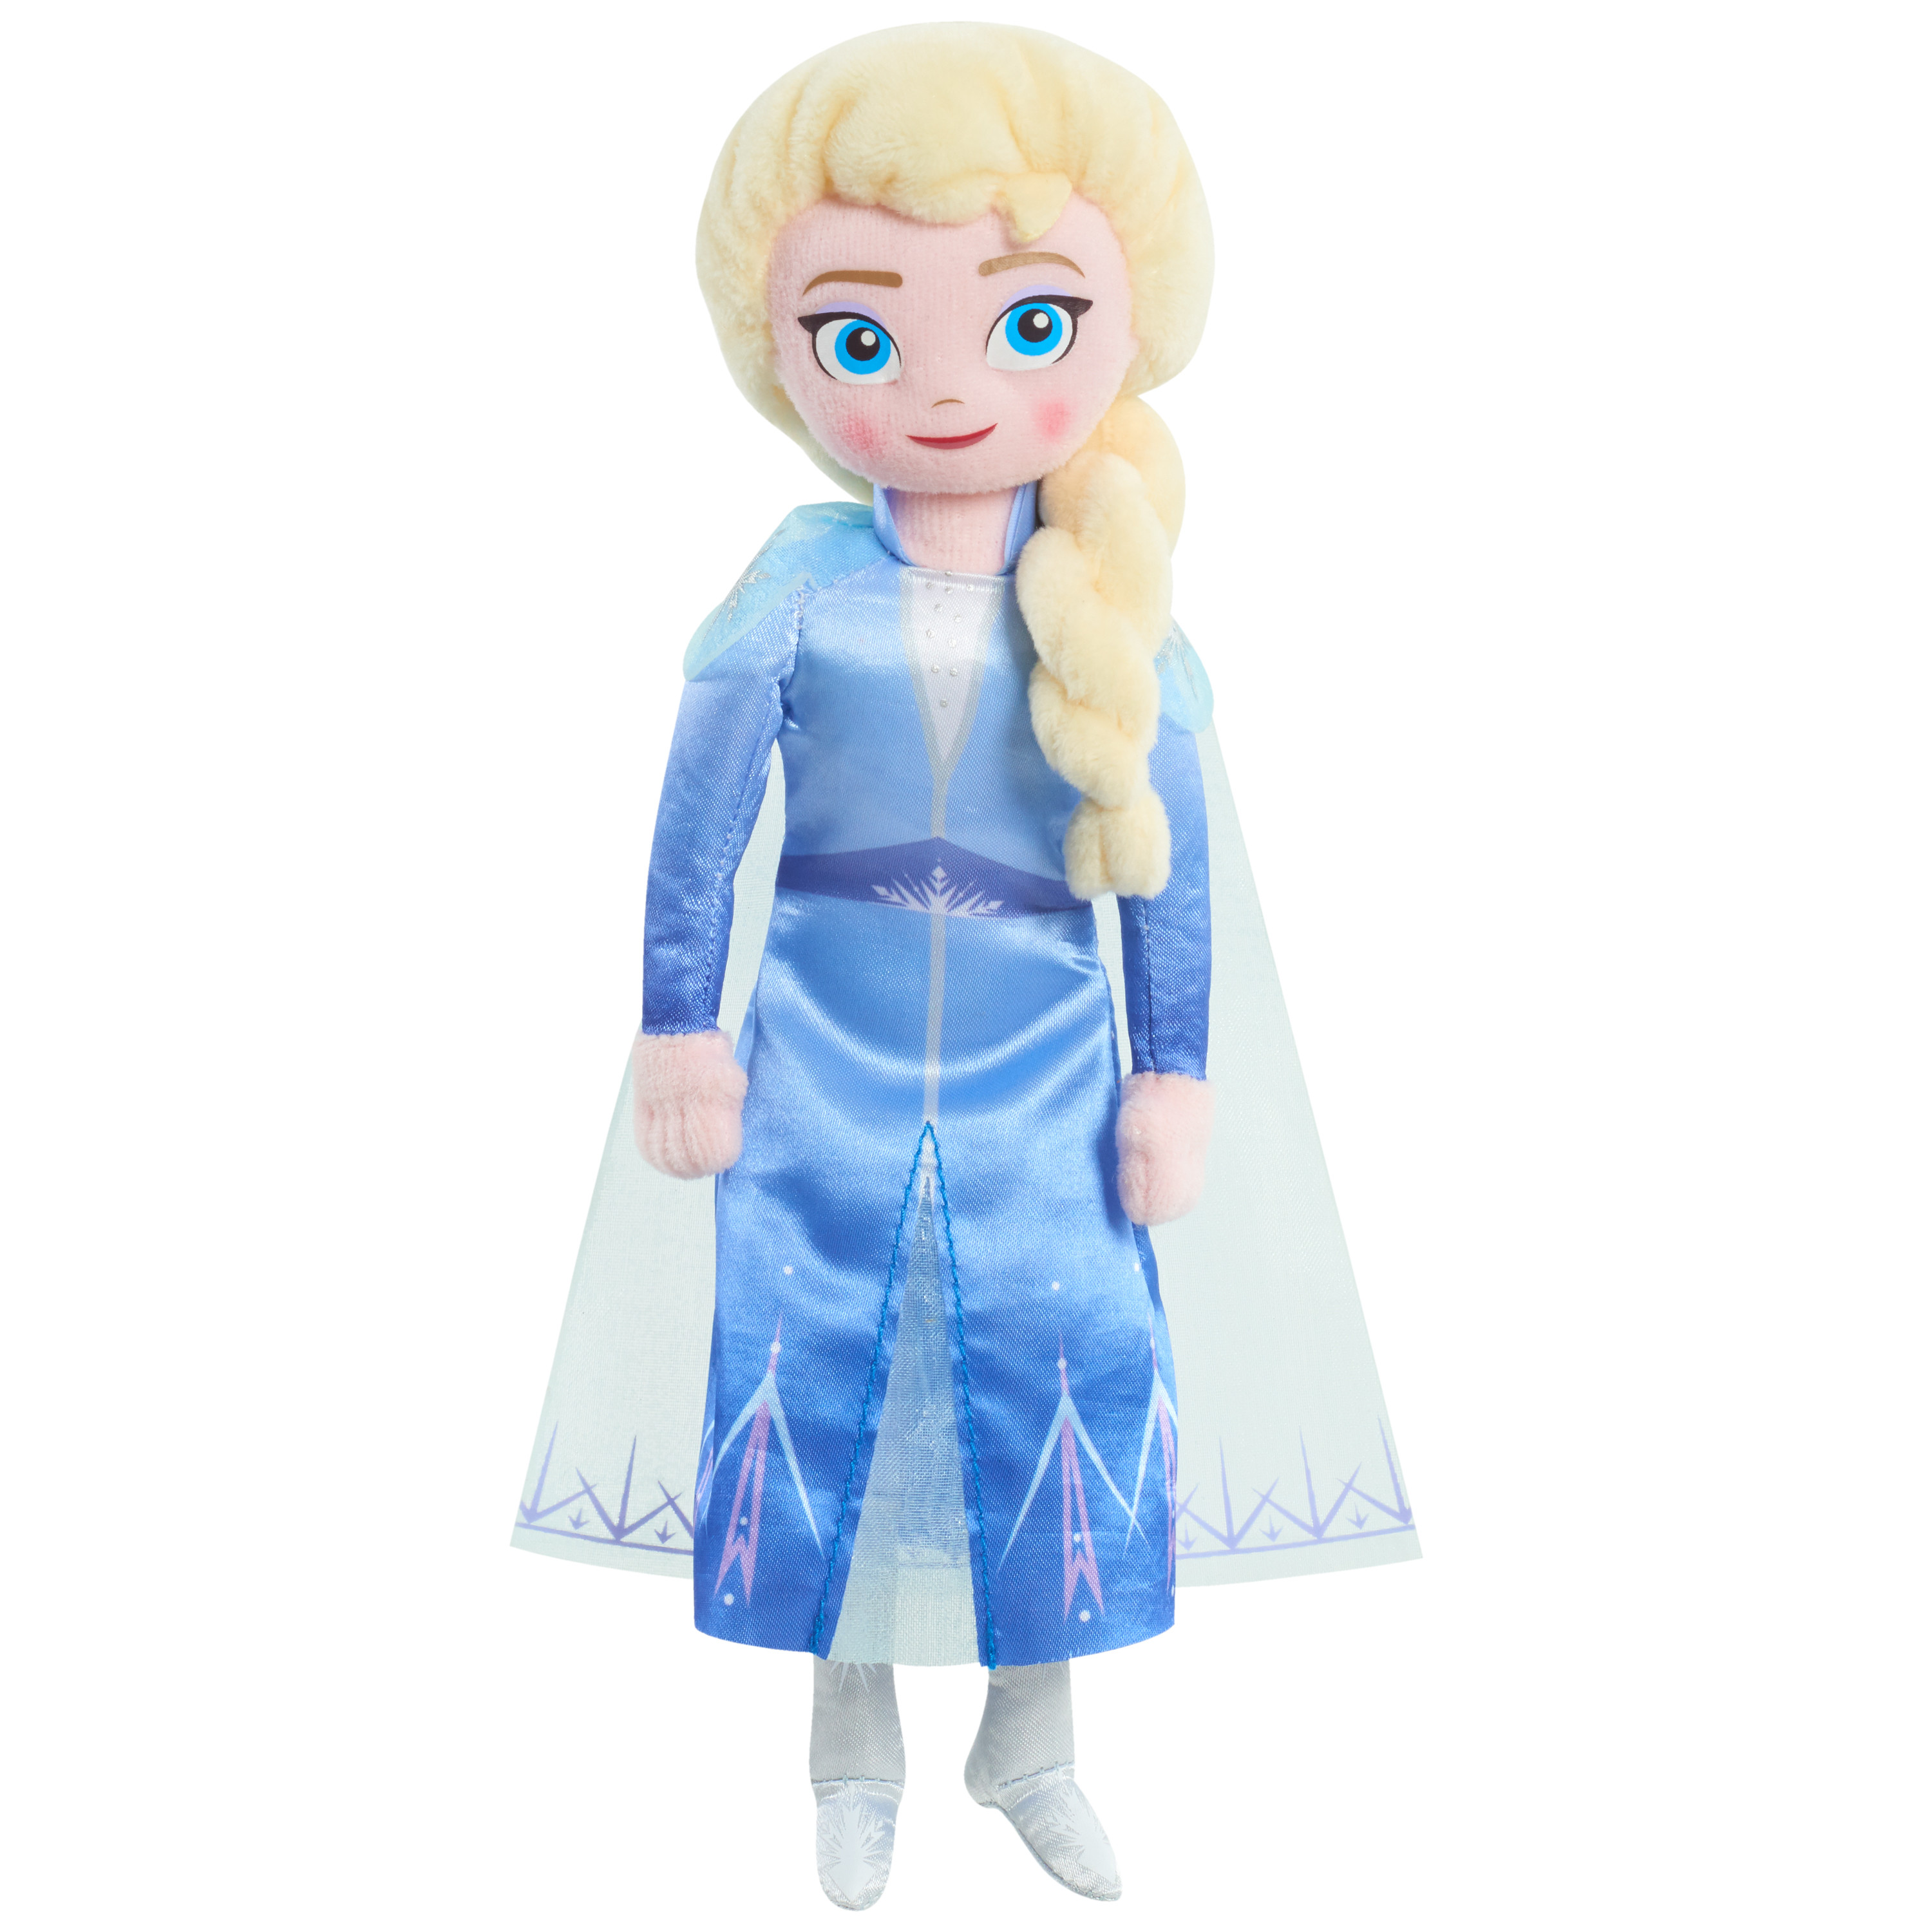 Disney’s Frozen 2 Plush Collector Set, 5-pieces, Officially Licensed Kids Toys for Ages 3 Up, Gifts and Presents - image 3 of 3